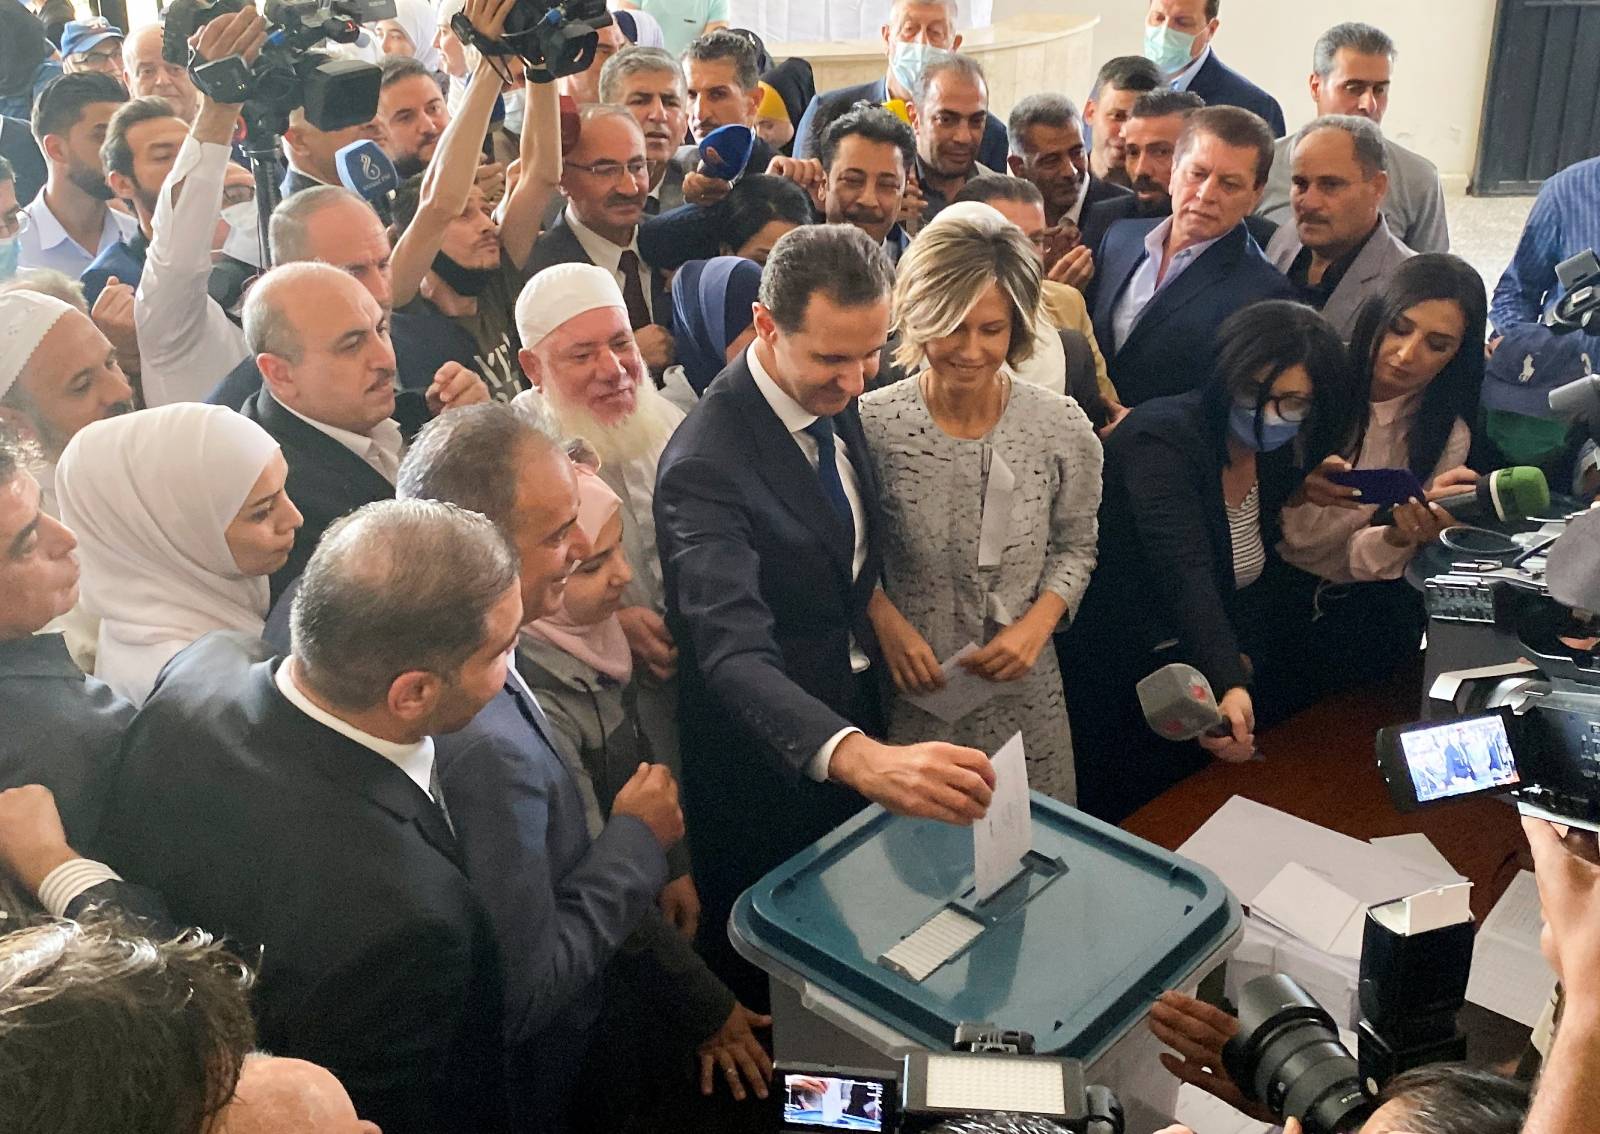 Syria's President Bashar al-Assad and his wife Asma cast their votes during the country's presidential elections at a polling station in Douma